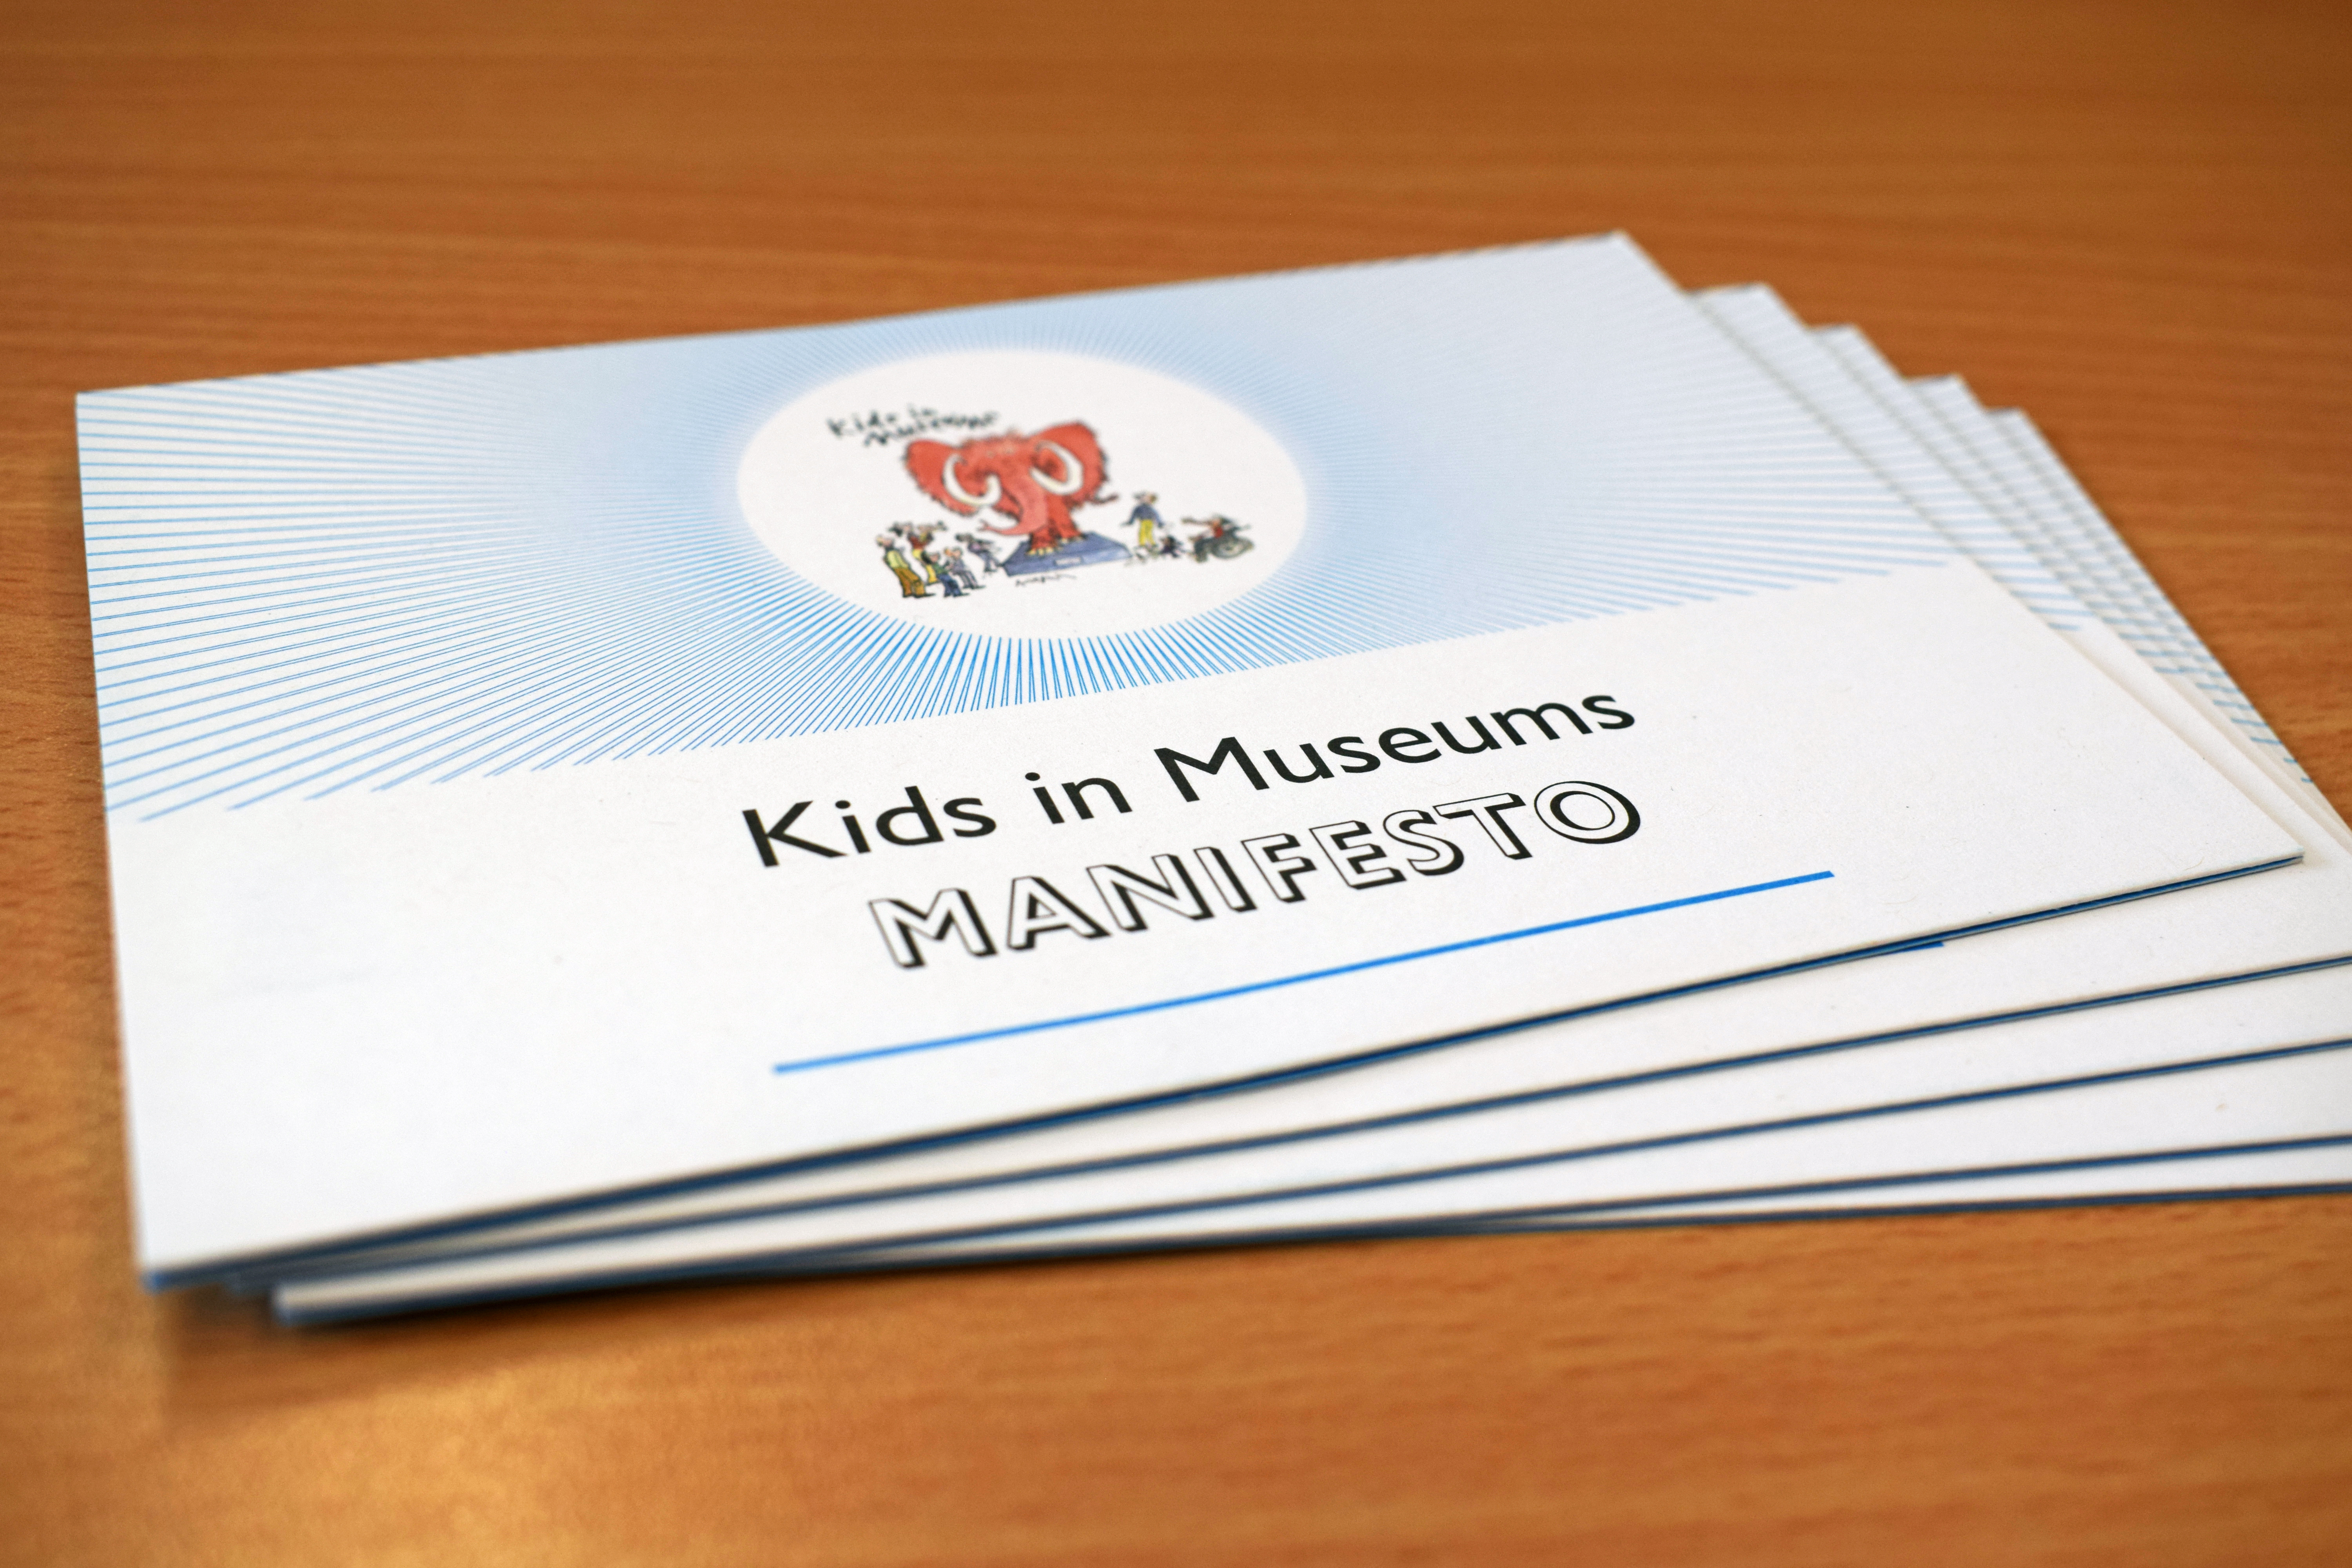 A pile of paper copies of the Kids in Museums Manifesto lying on a table.